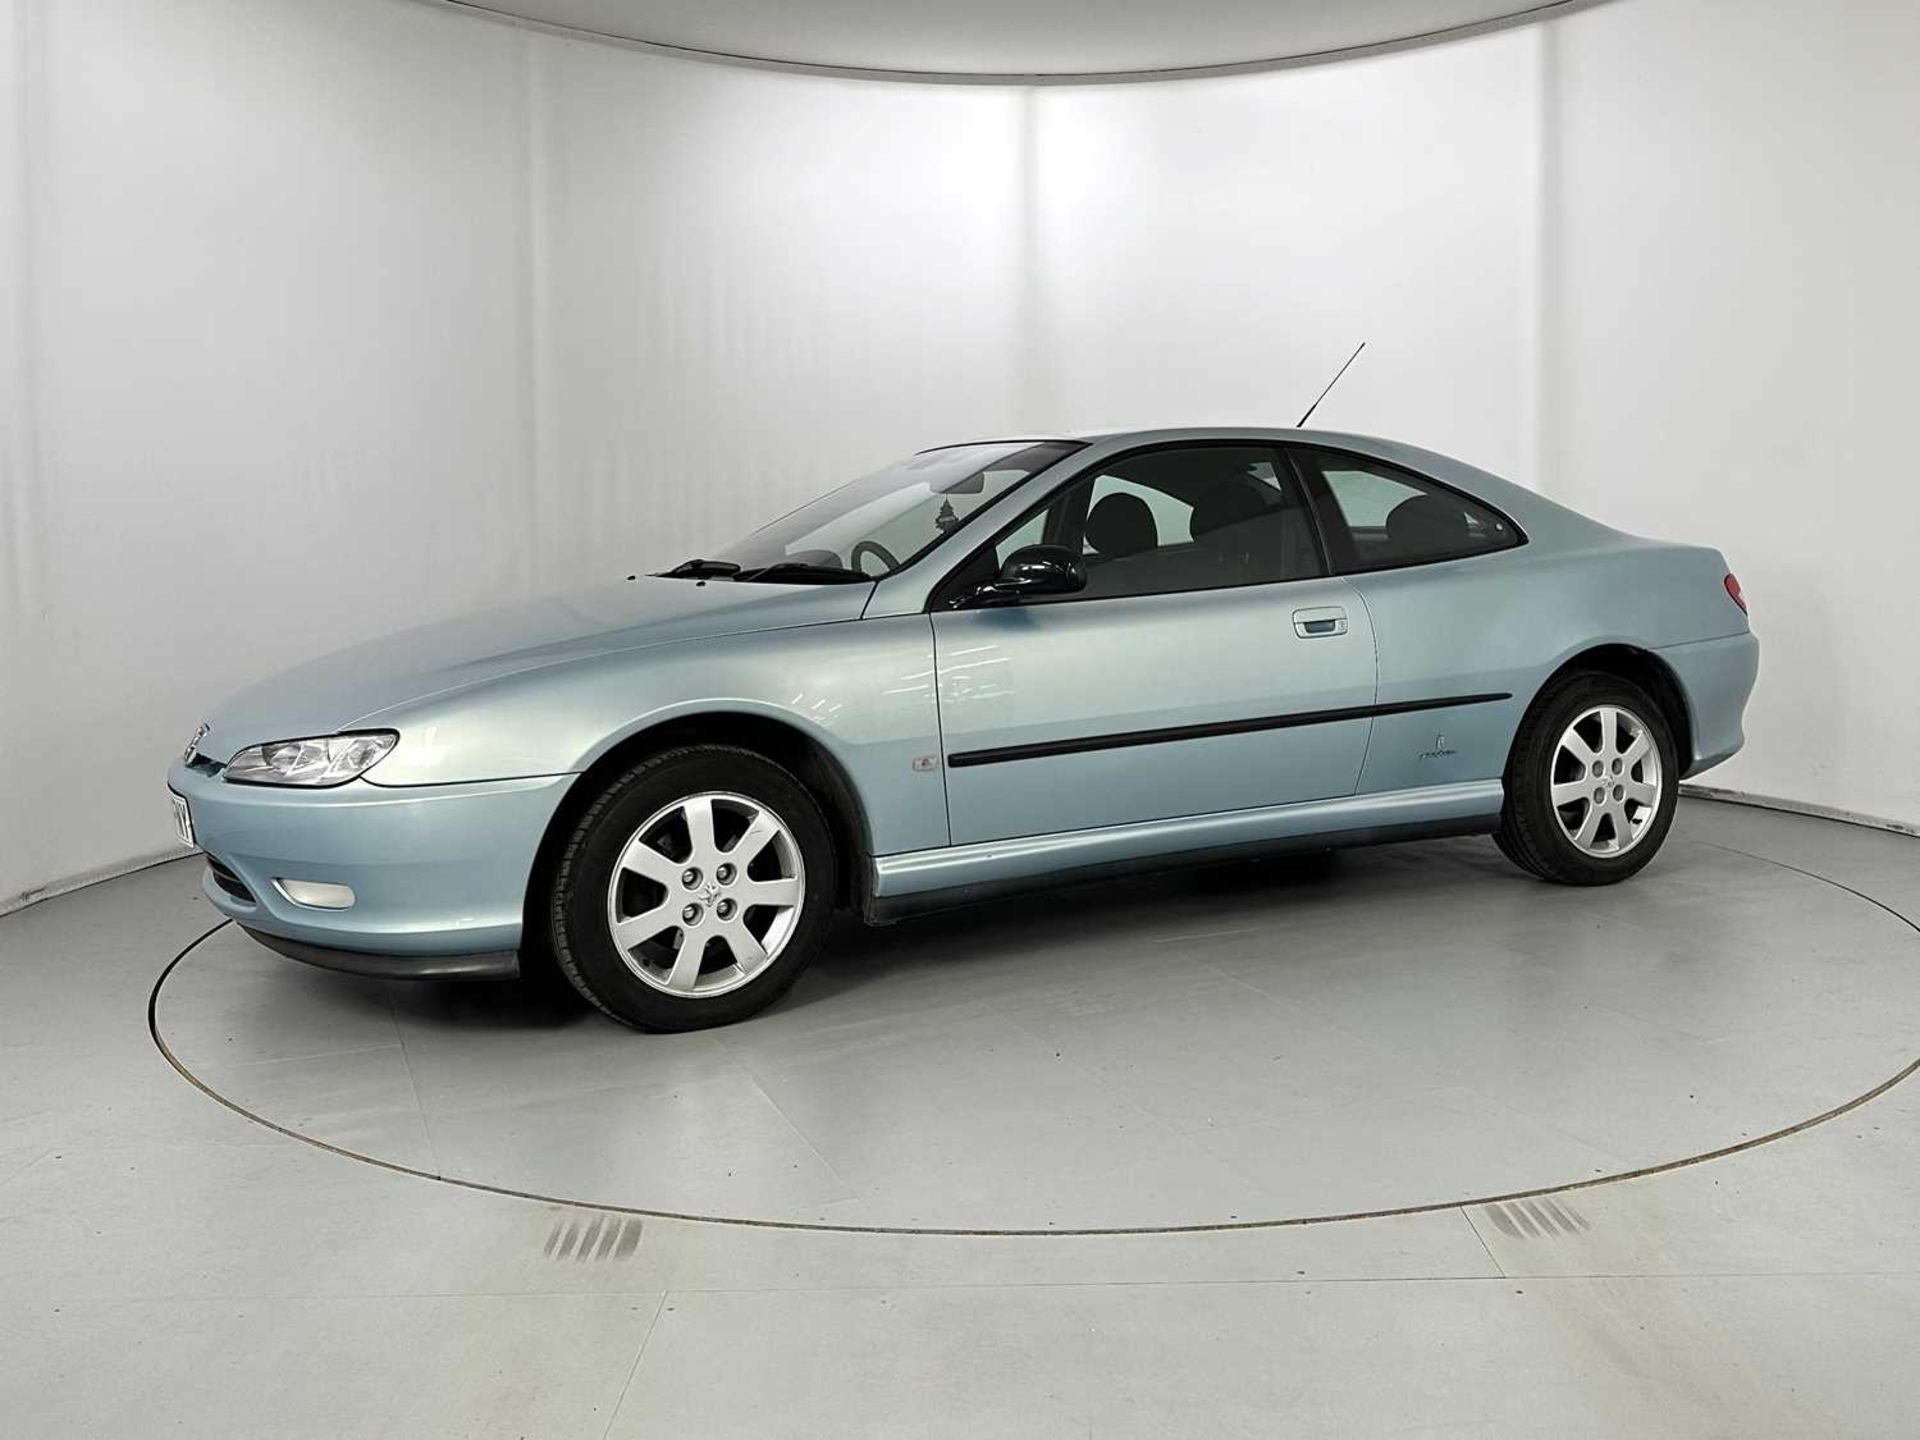 2002 Peugeot 406 Coupe - Image 4 of 28